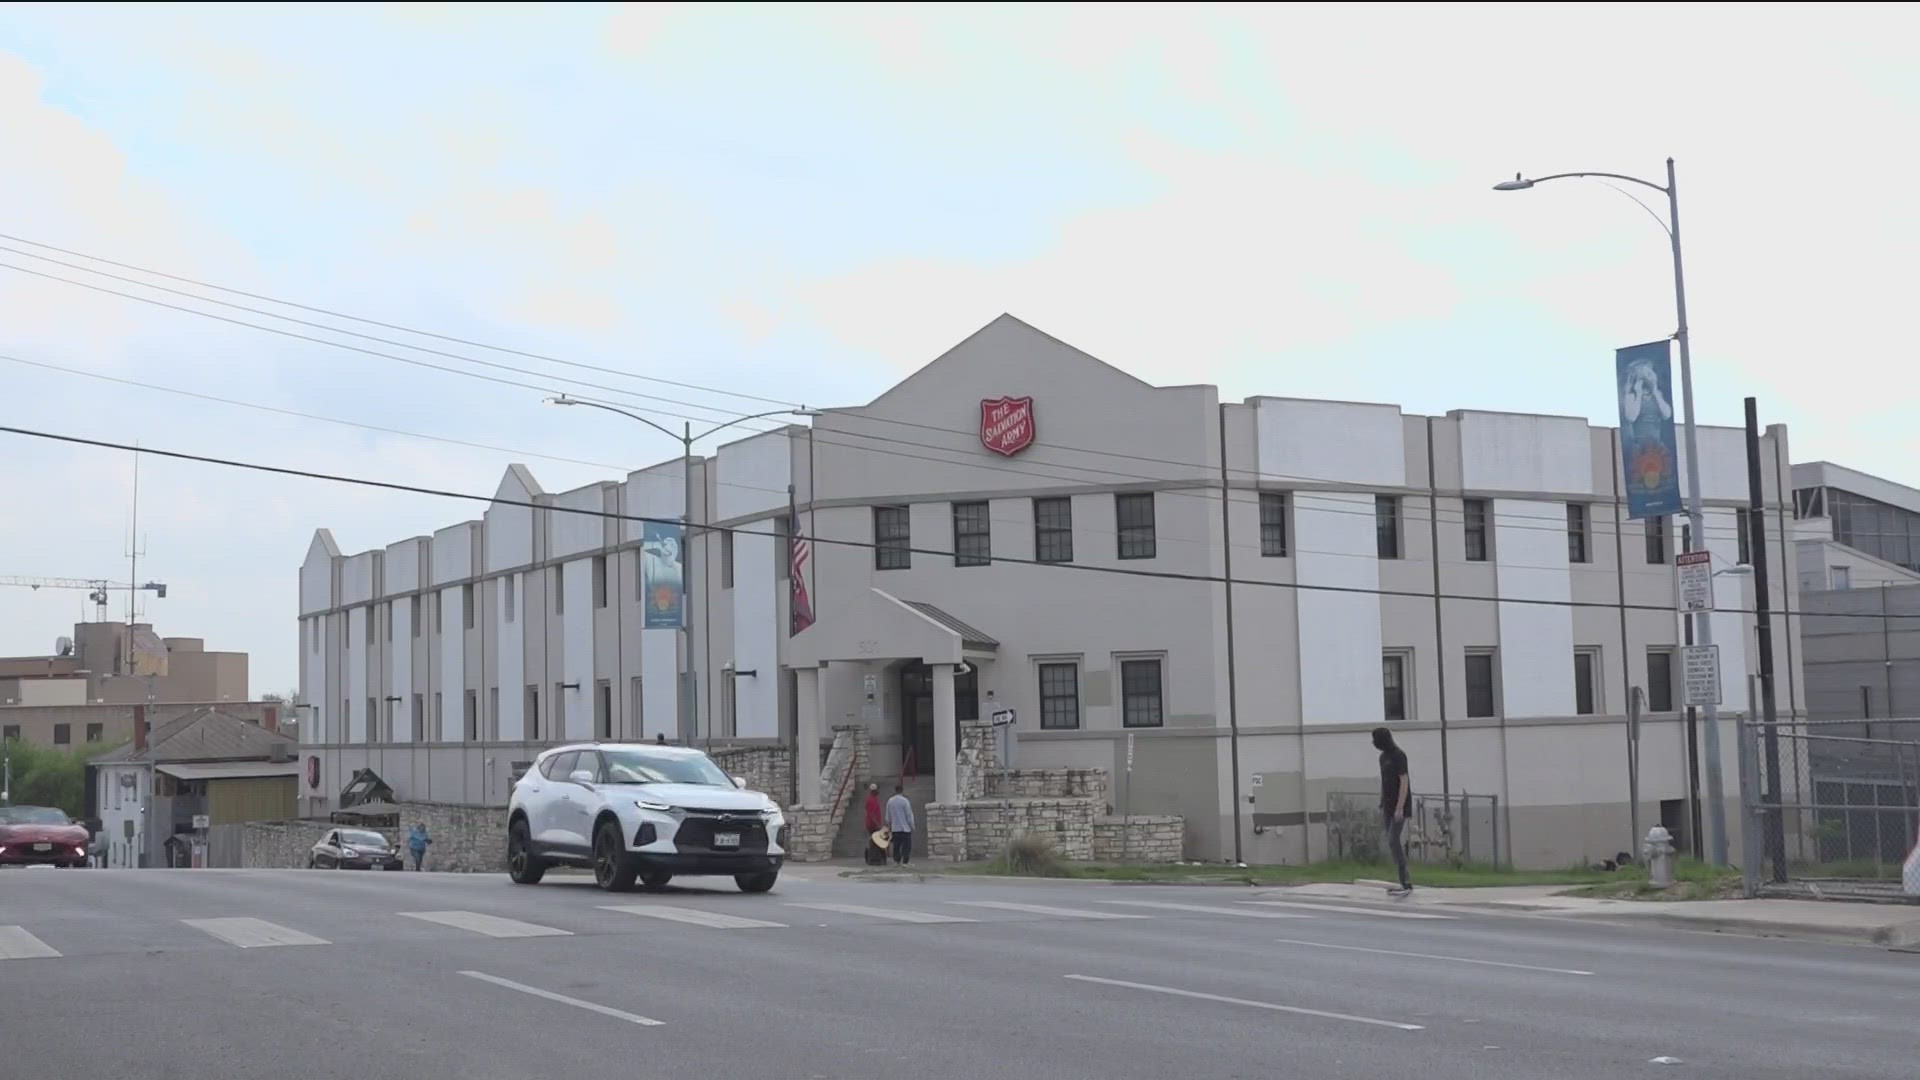 The Salvation Army will stay operational for up to 30 days.